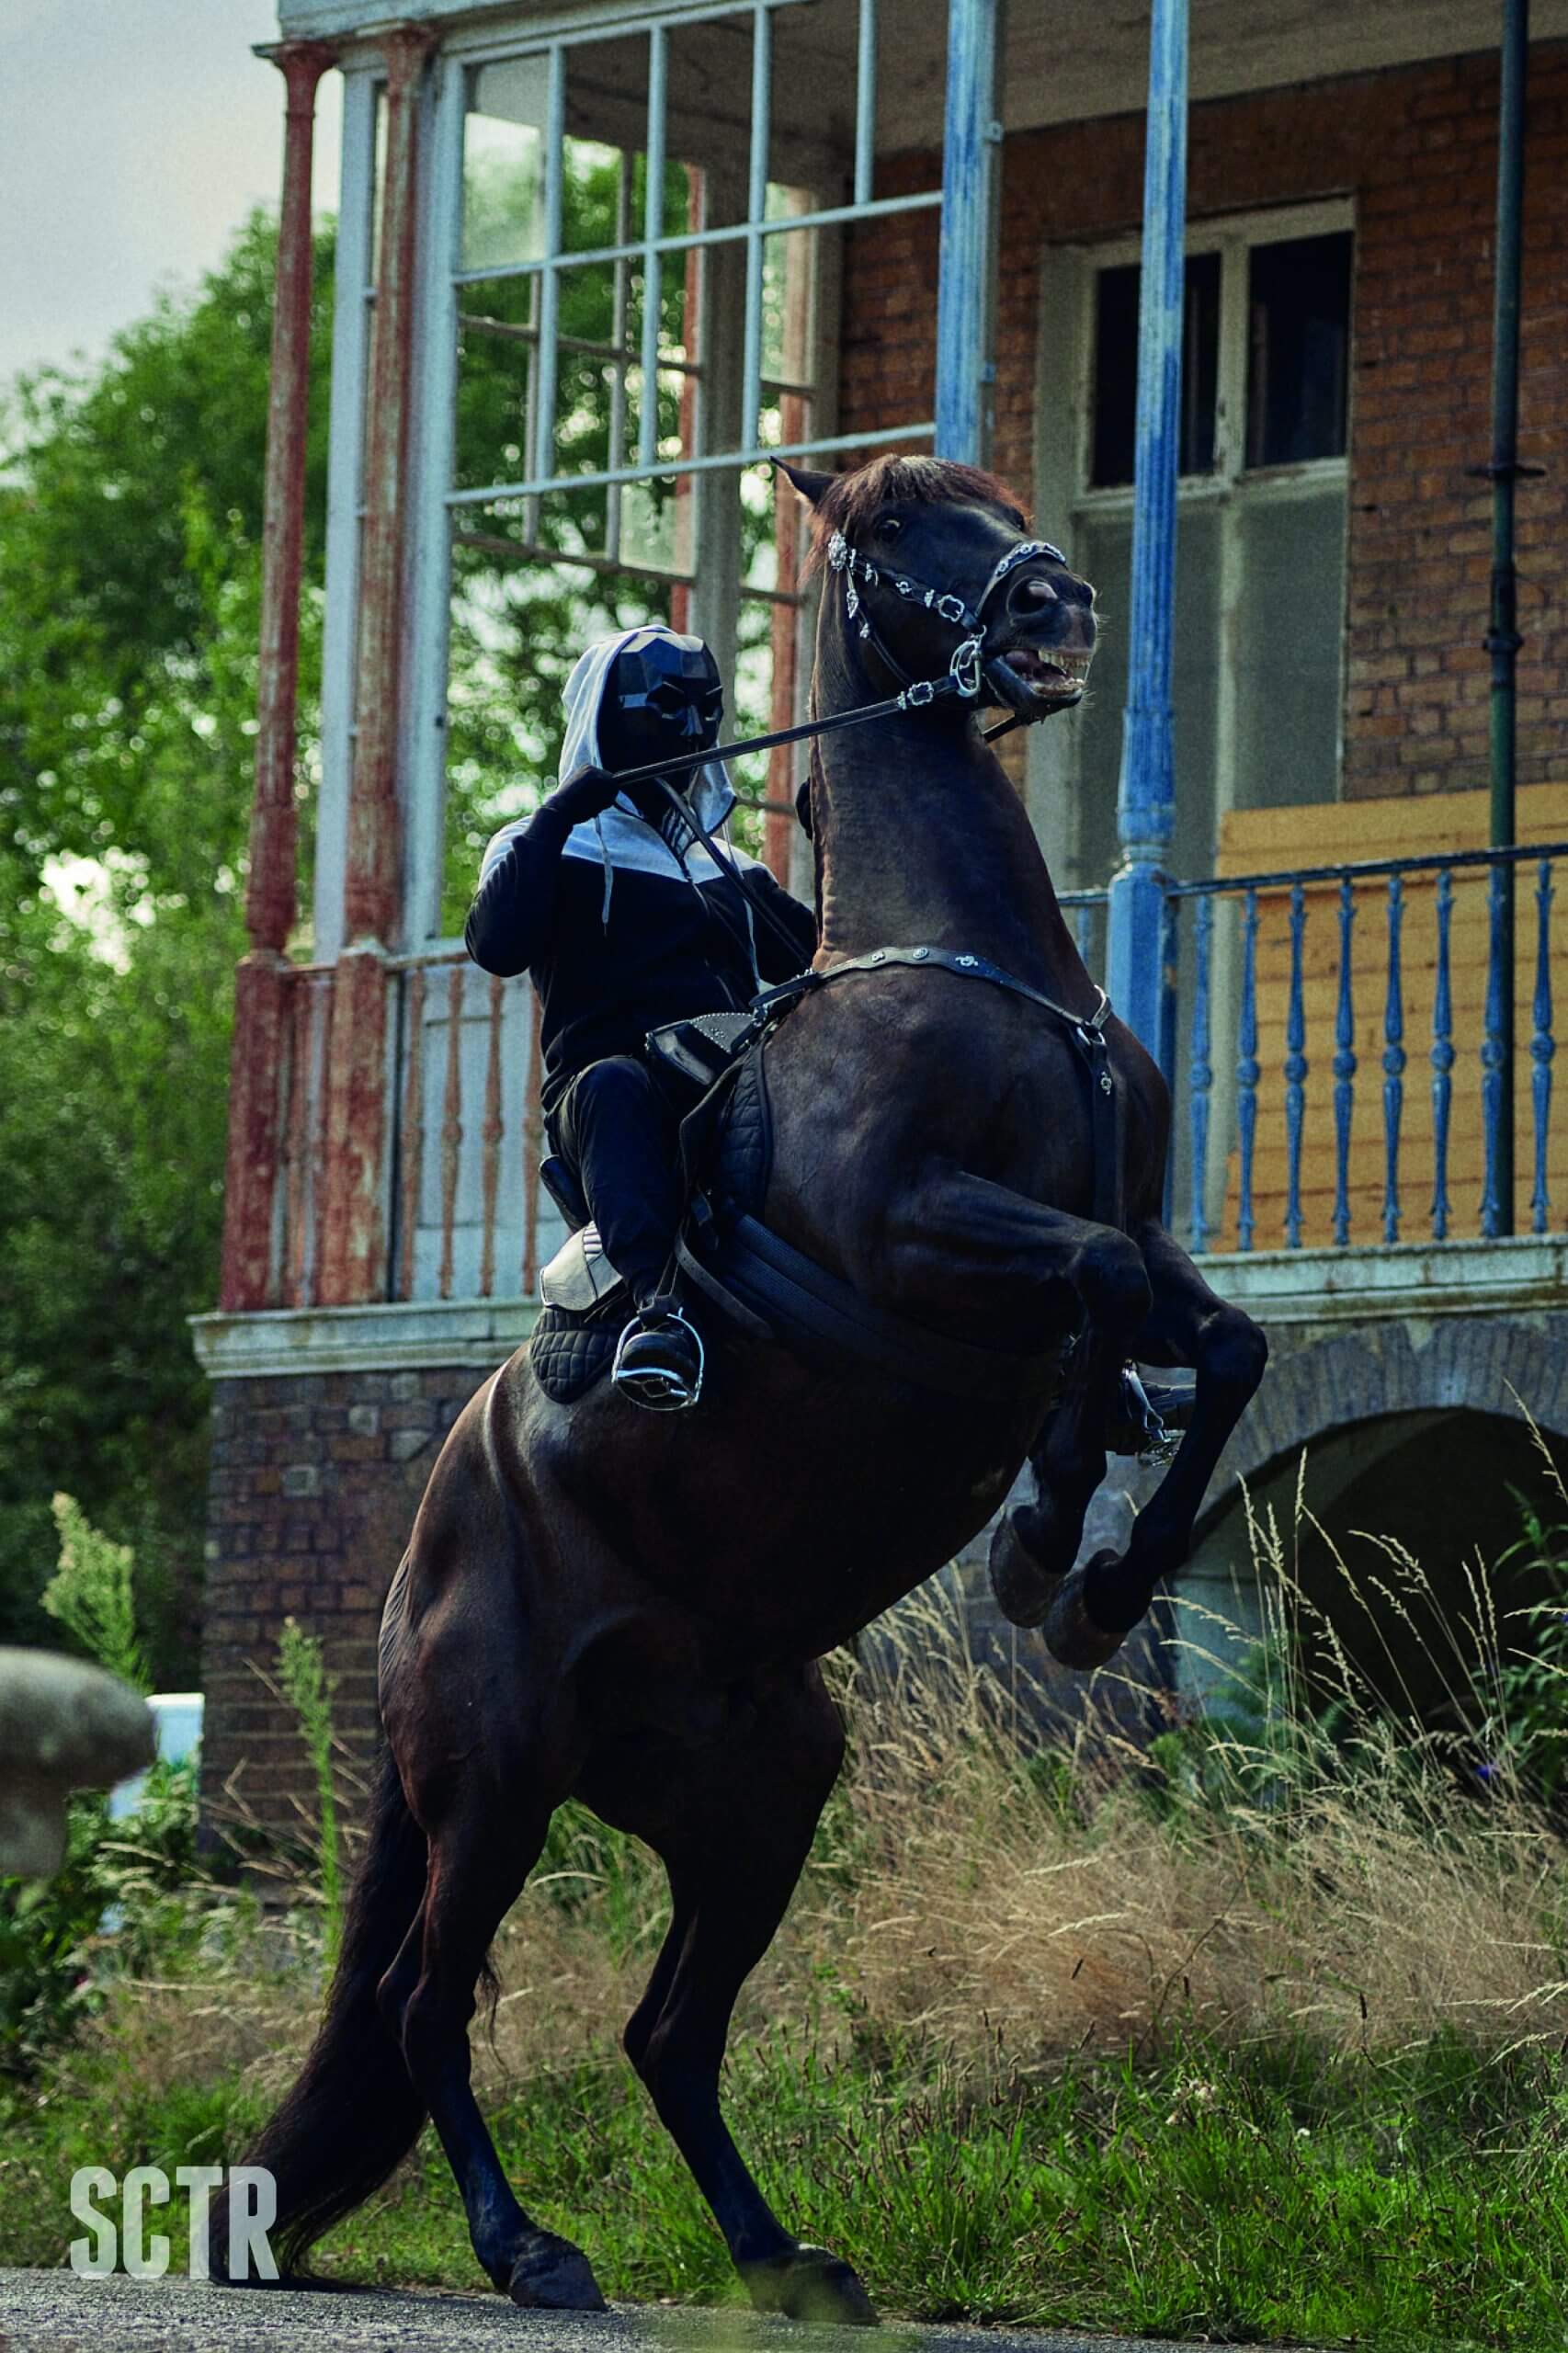 A hooded figure riding a rearing horse